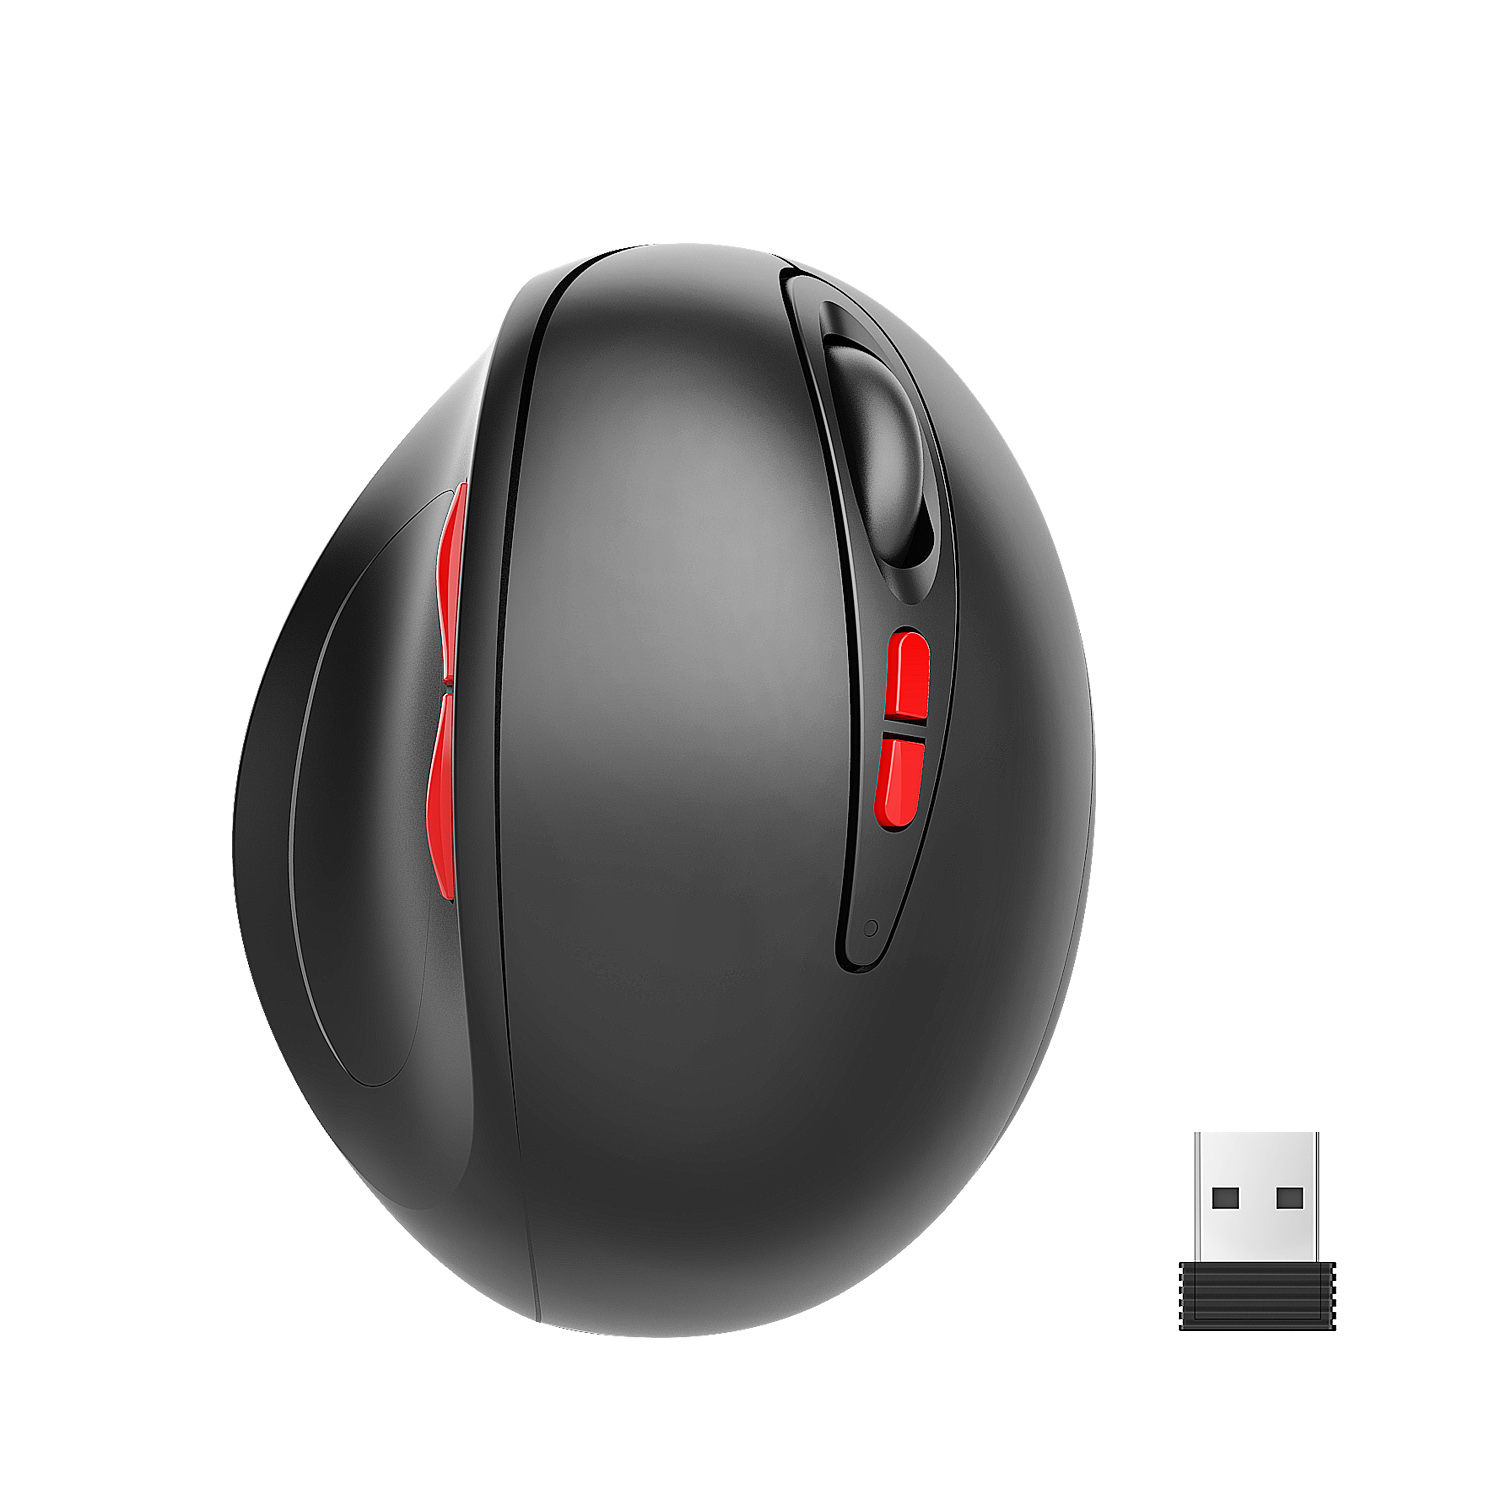 

2400DPI 2.4GHz Wireless Adjustable 4 Buttons Ergonomic Optical Mouse for PC Gaming and Office